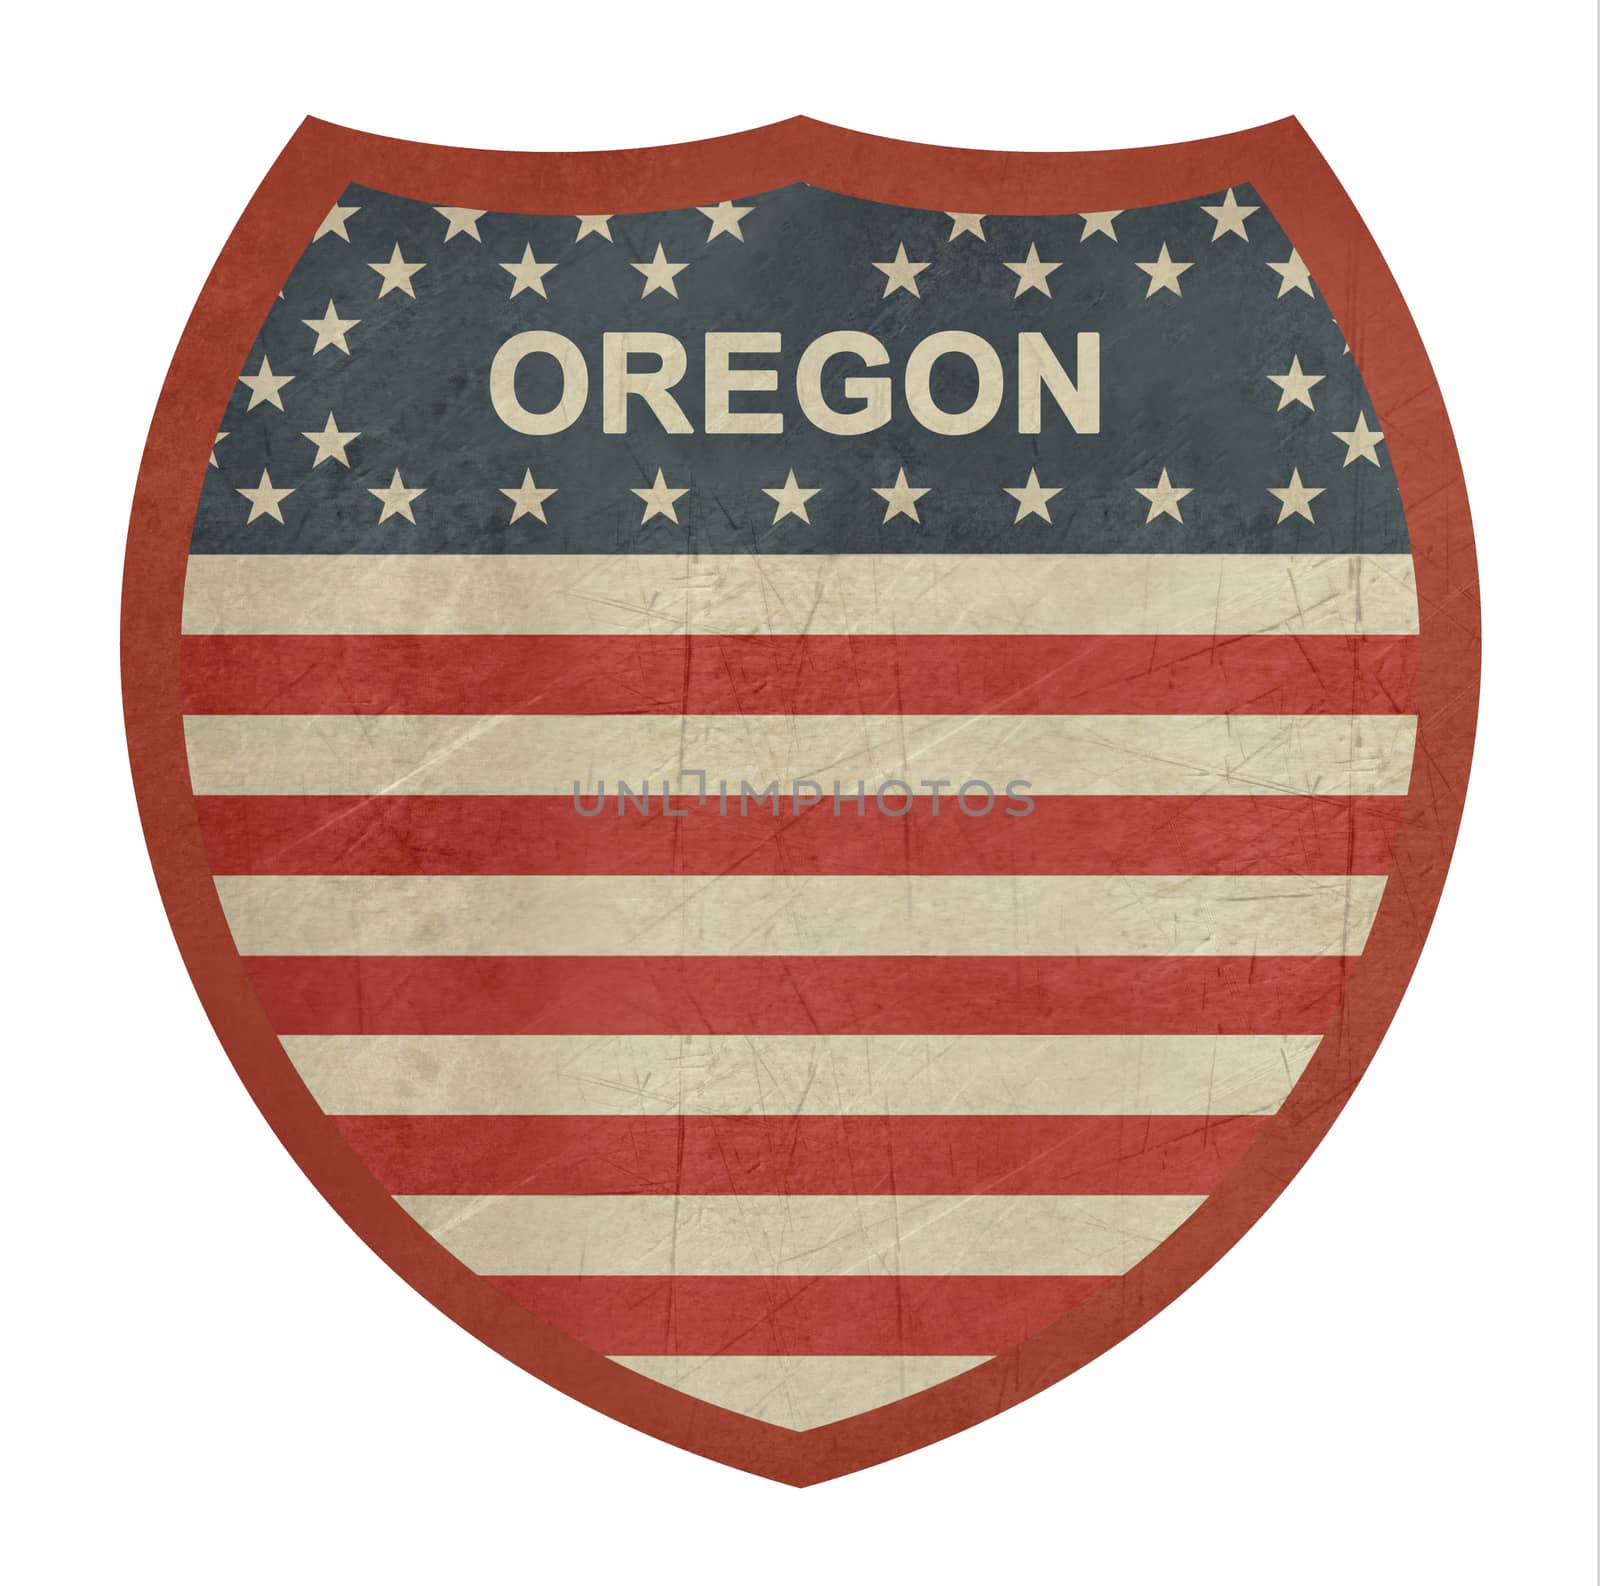 Grunge Oregon American interstate highway sign isolated on a white background.